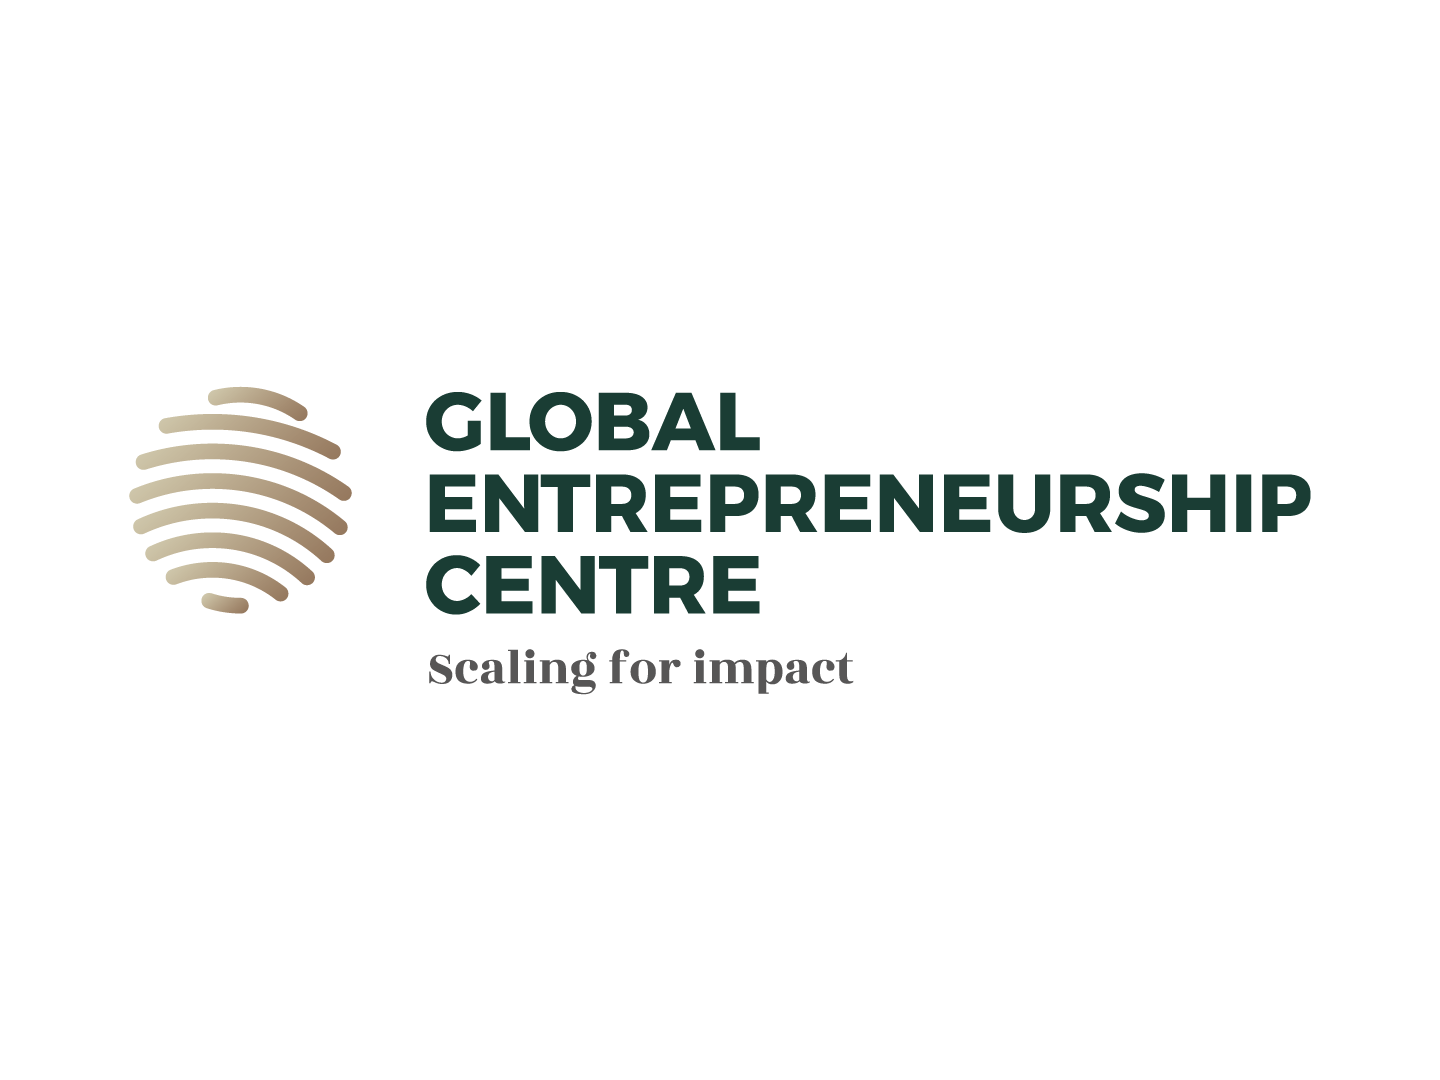 Global Entrepreneurship Center publishes new call for proposals for sustainable startups